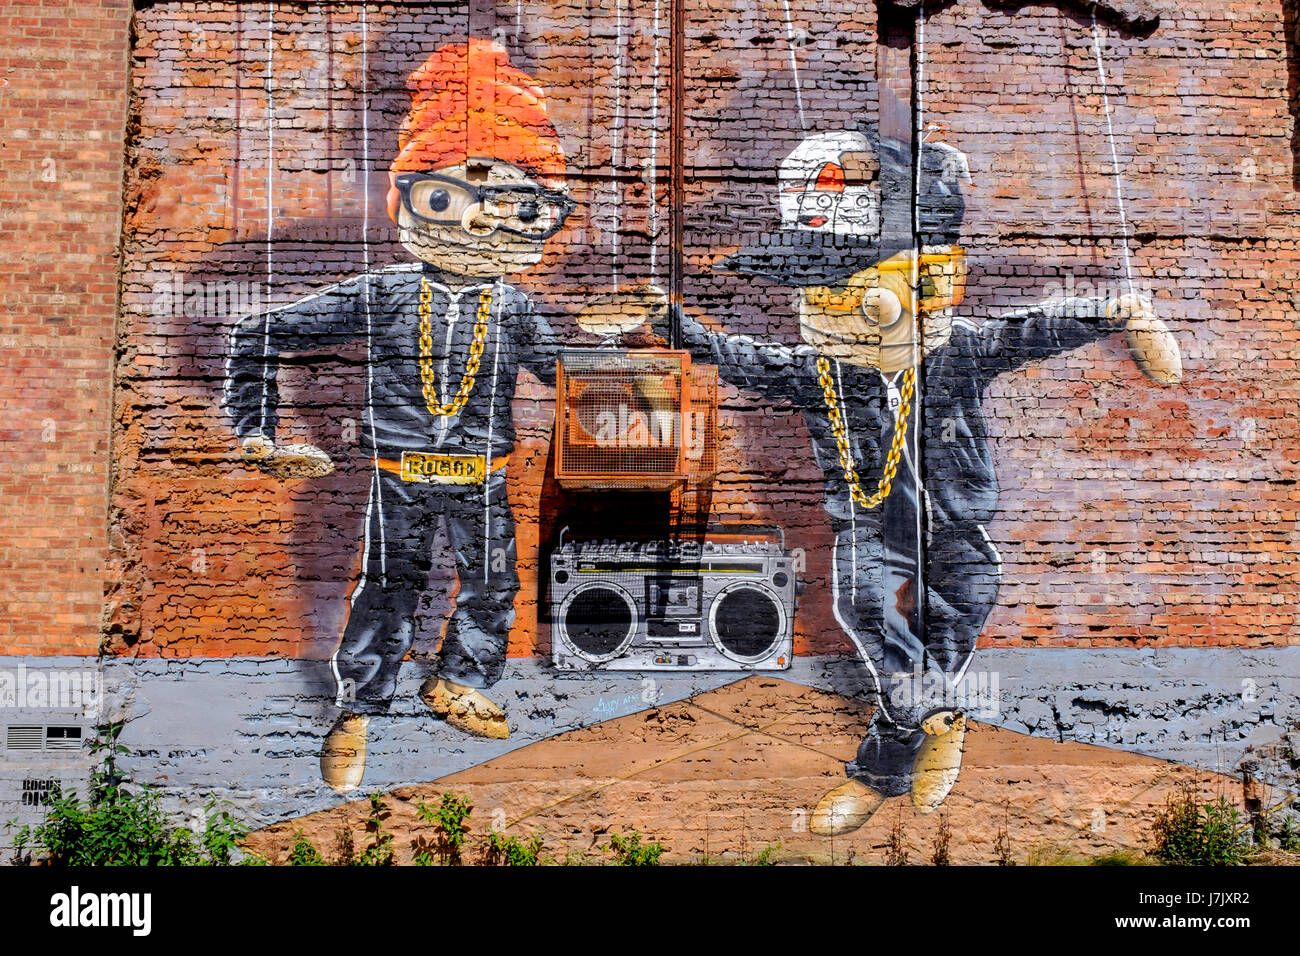 Wall art on a gable end wall in Glasgow city centre, depicting two puppets dancing to music, Glasgow, Scotland, UK Stock Photo